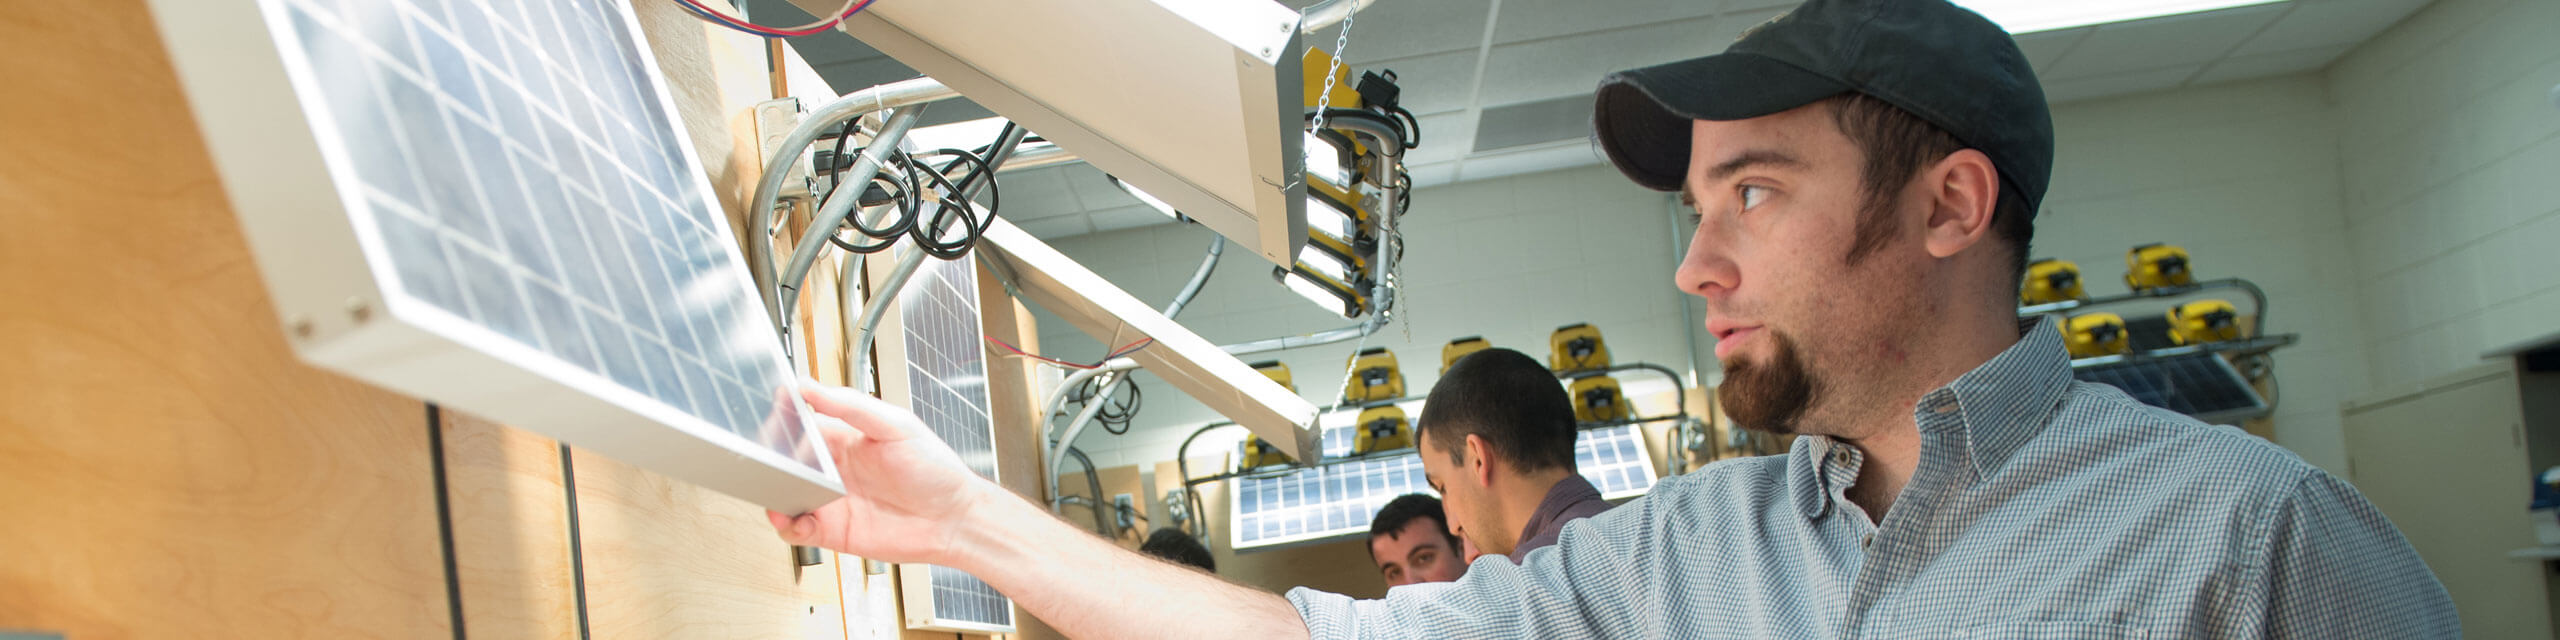 Student works on a solar panel.